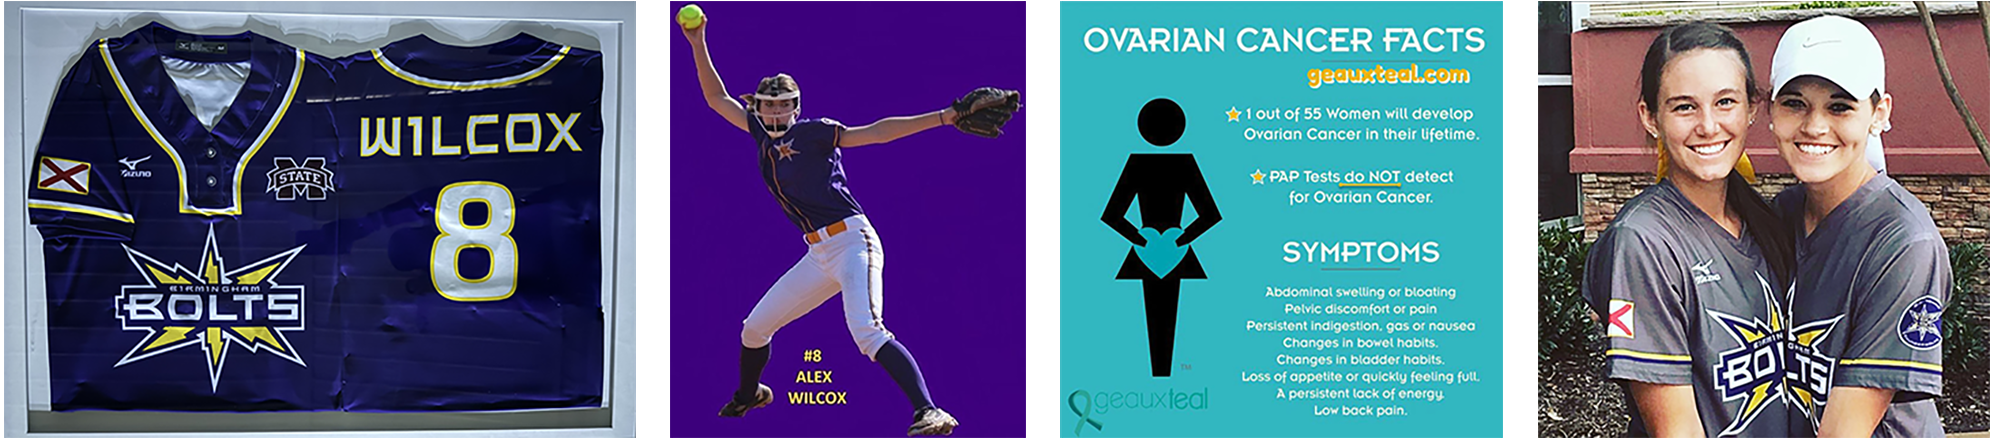 Thunderbolts Girls Fastpitch Softball team honors Alex Wilcox legacy to raise awareness of the signs and symptoms of ovarian cancer.